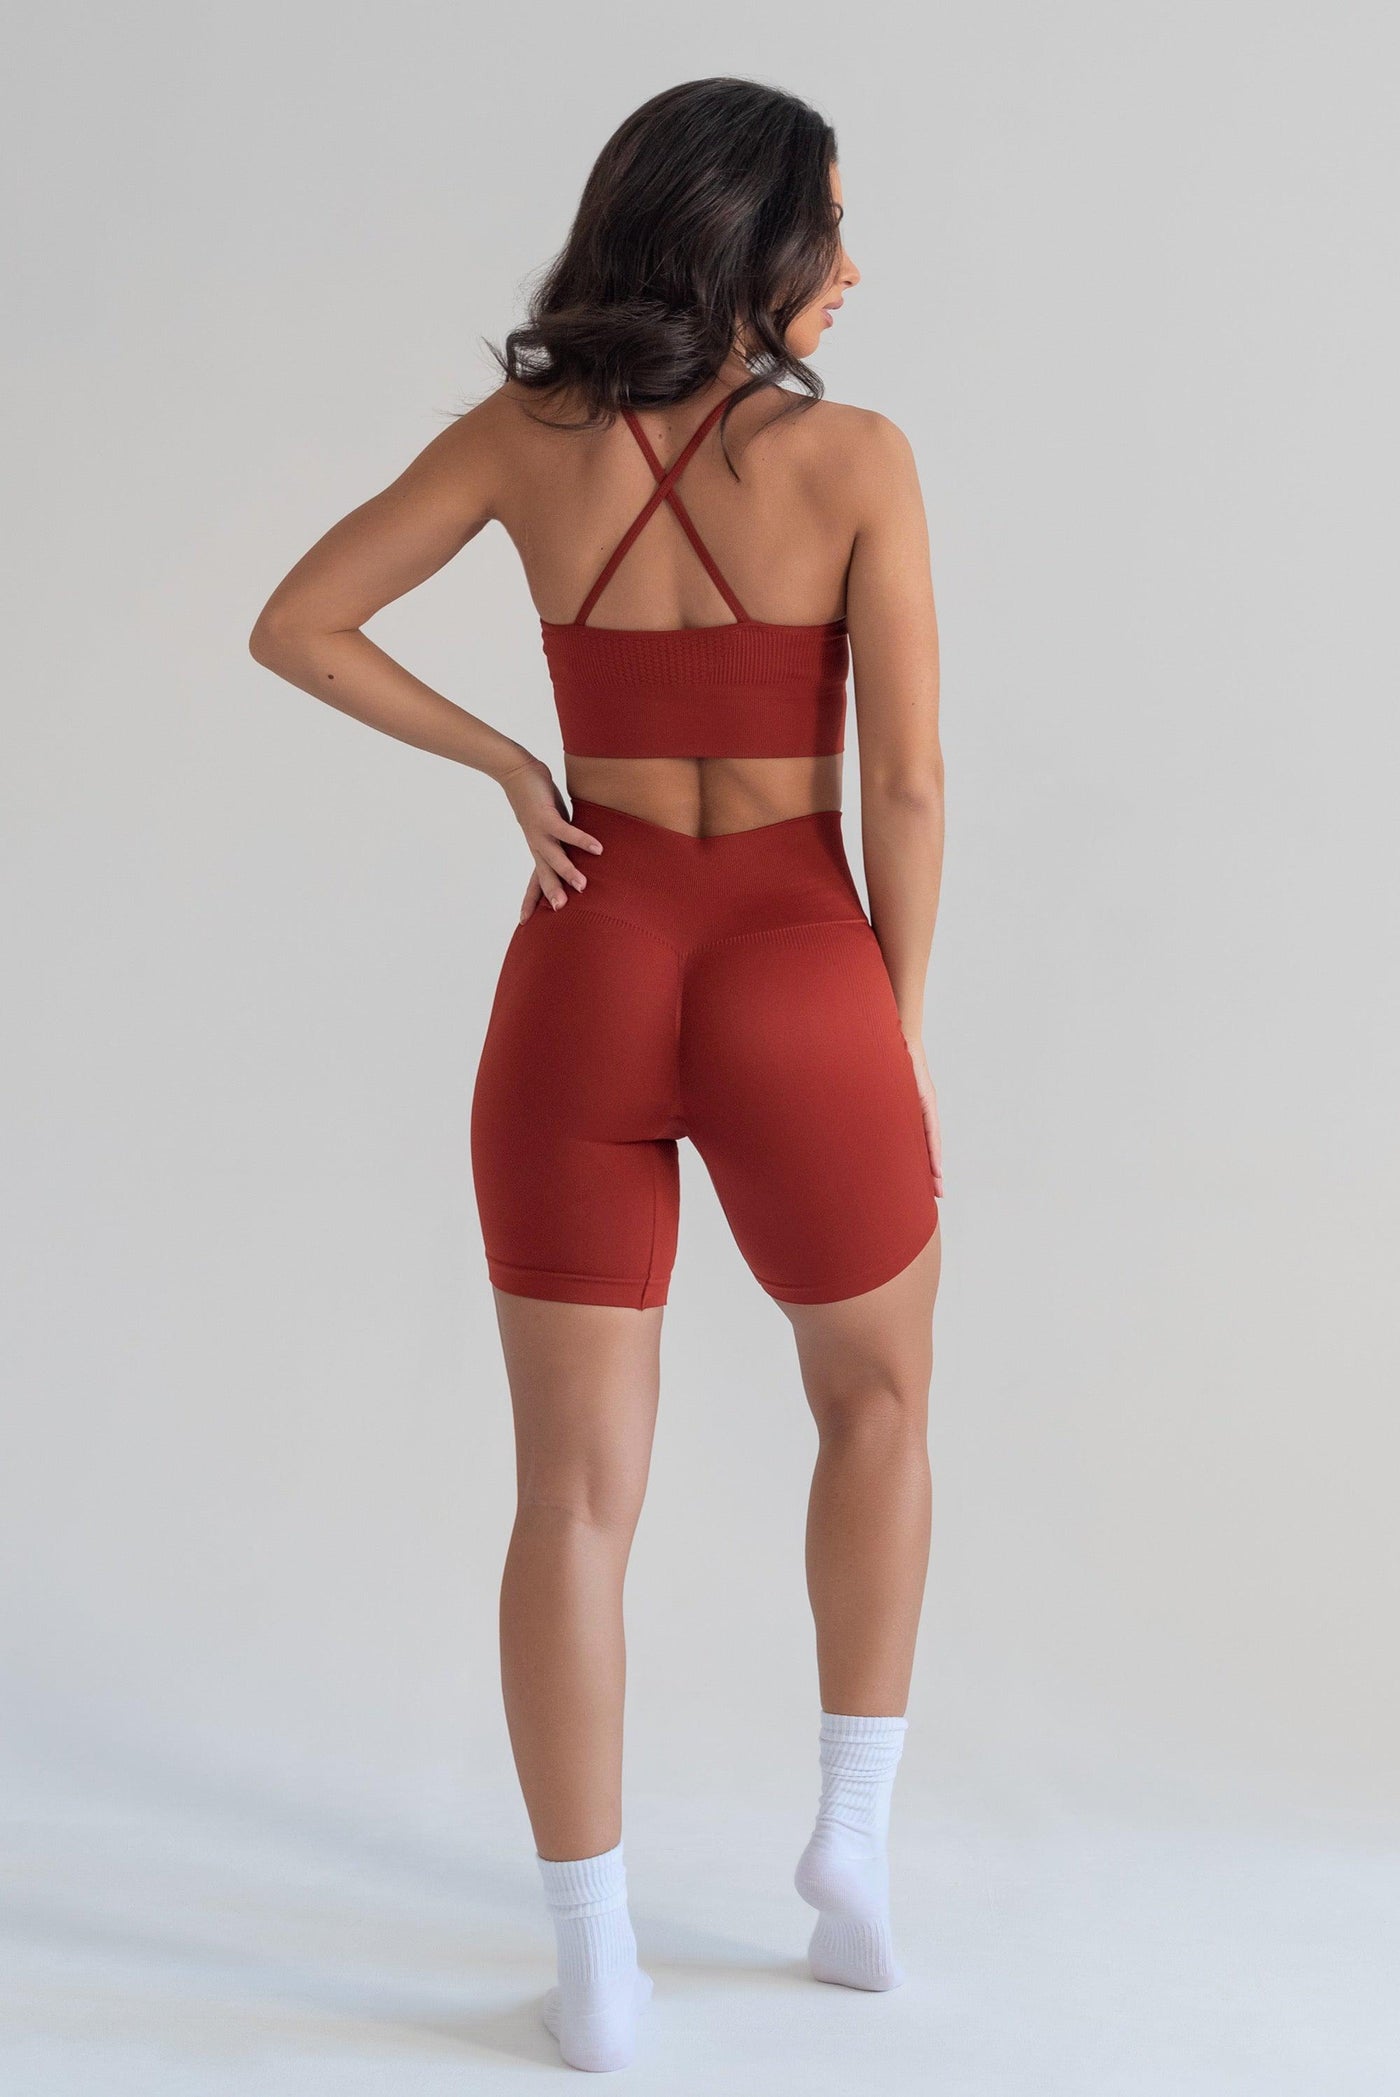 Bliss Biker Push-Up en Chili-Bikers-Tienda Ropa Leggings Yoga Sostenibles Reciclados Mujer On-line Barcelona Believe Athletics Sustainable Recycled Yoga Clothes